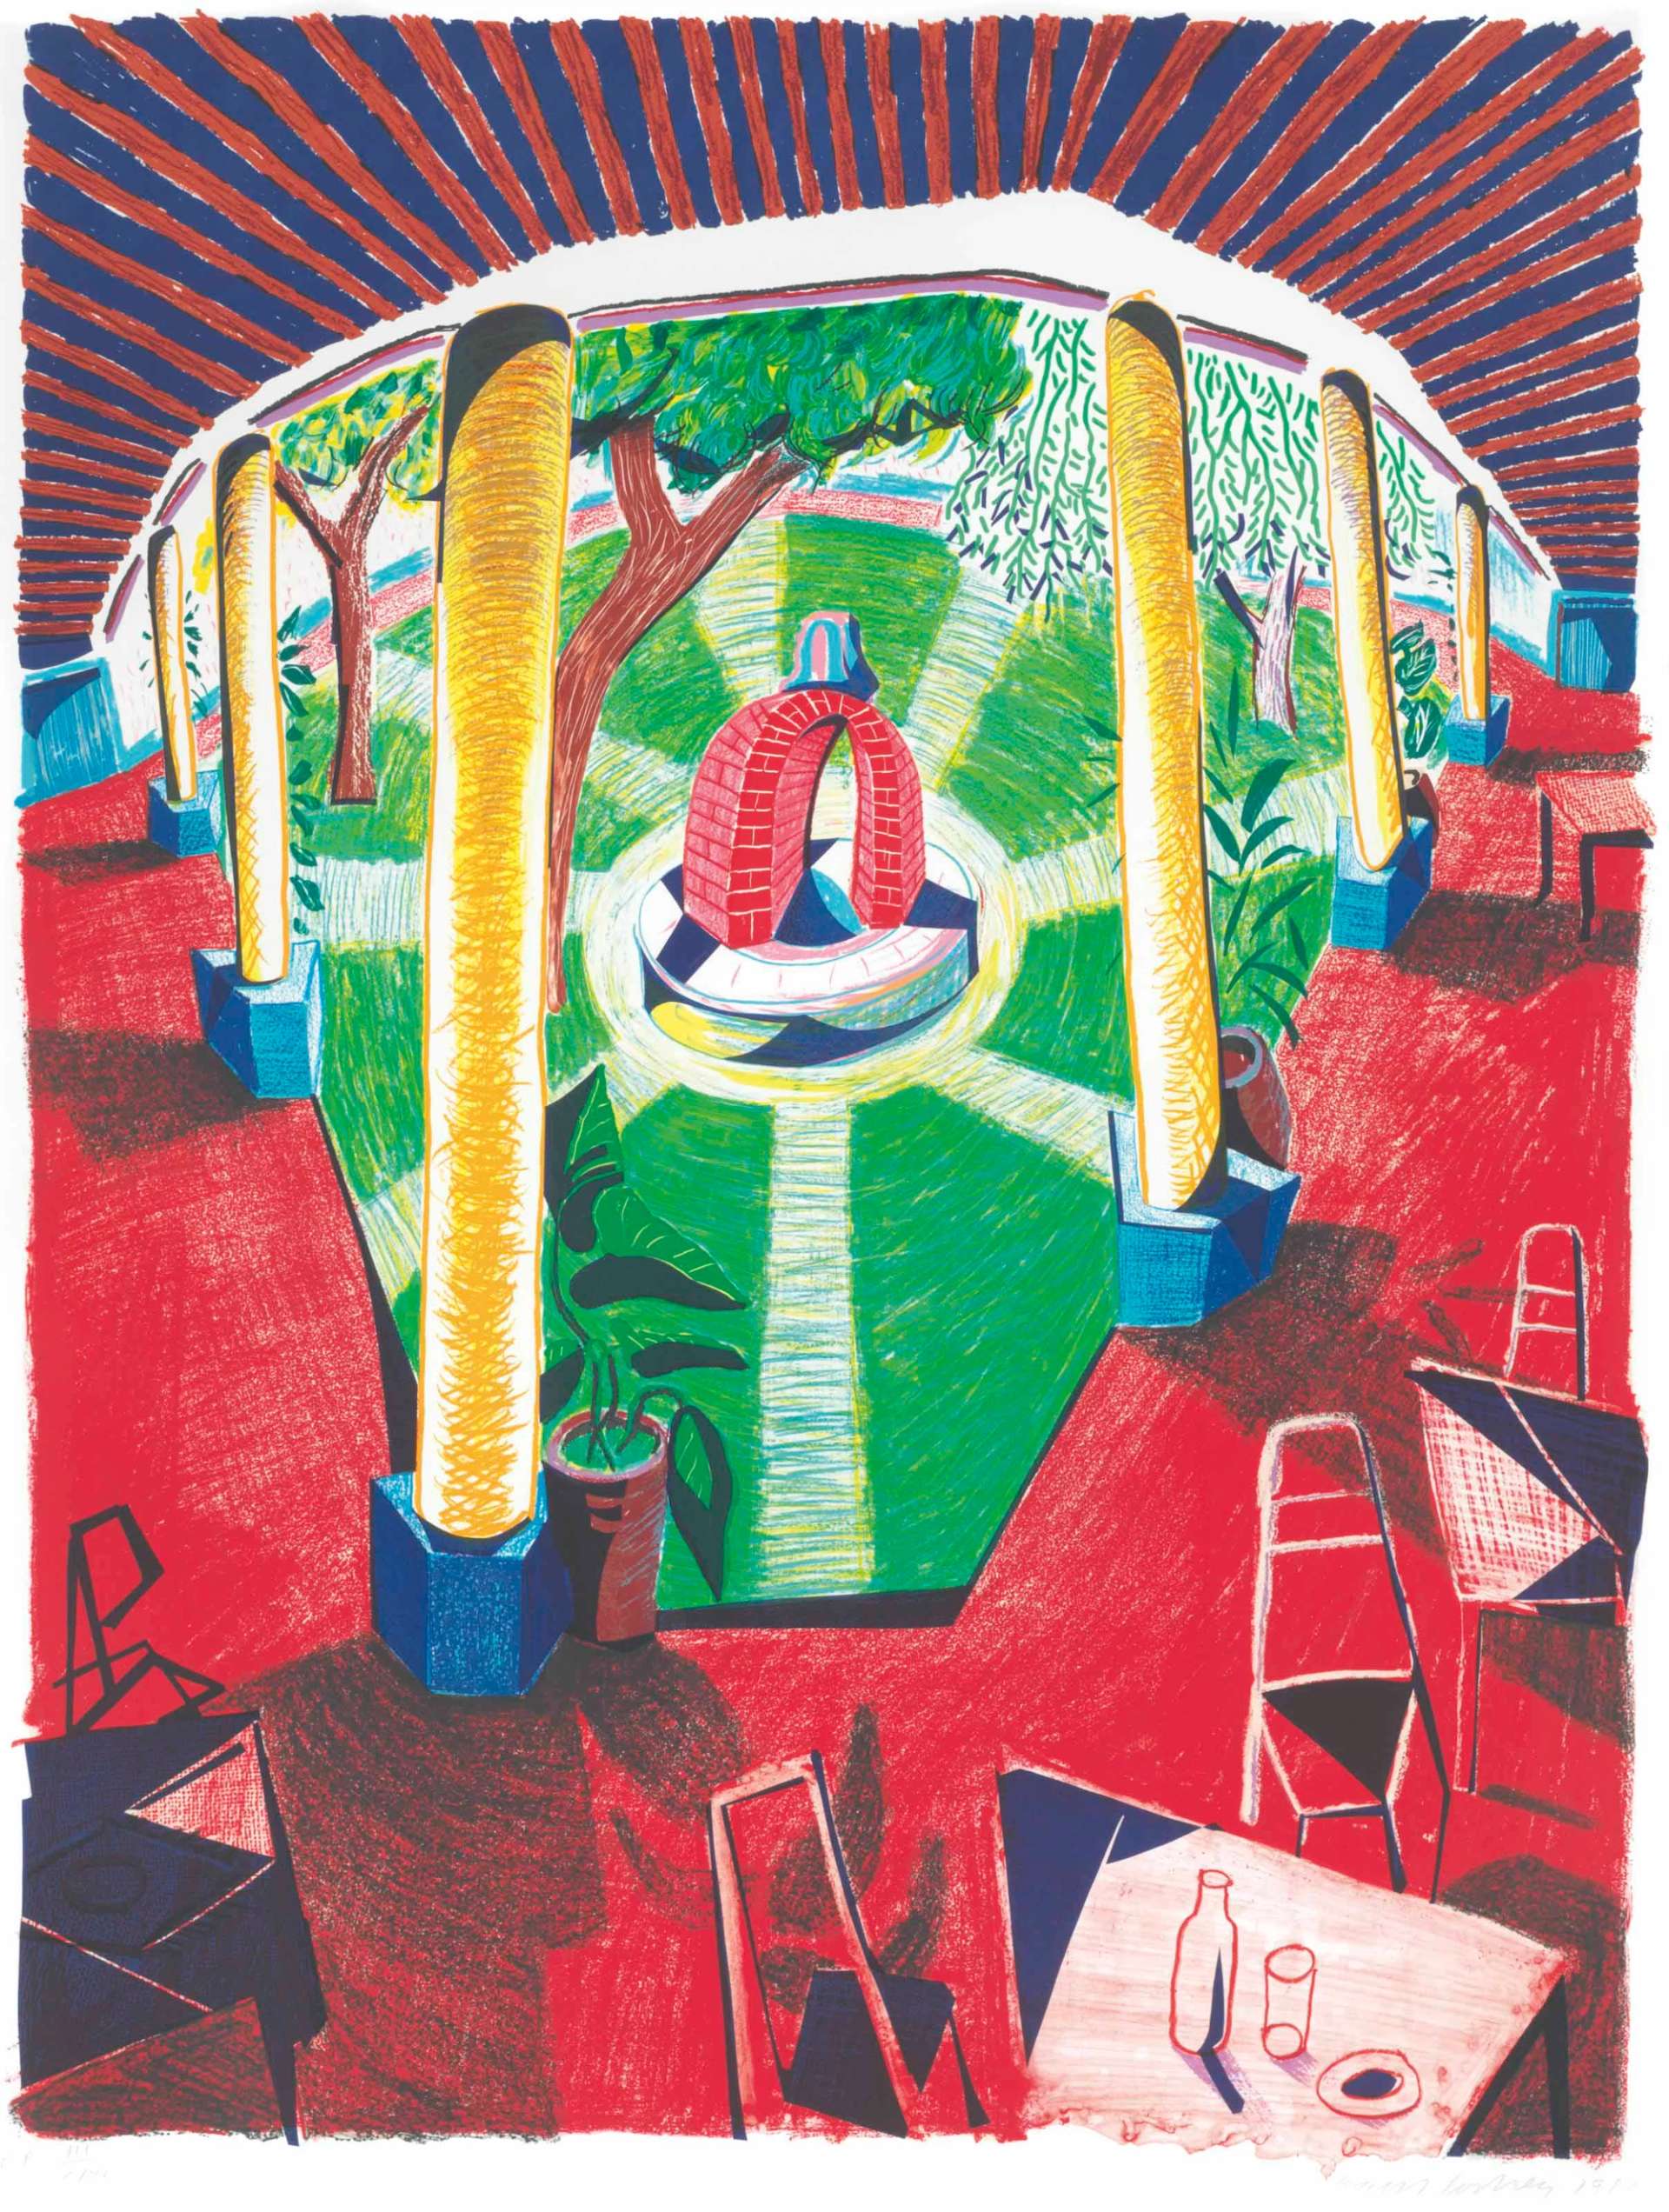 David Hockney’s Views Of Hotel Well III. A lithographic print of the exterior setting of a hotel well and its outdoor patio setting surrounded by pillars.